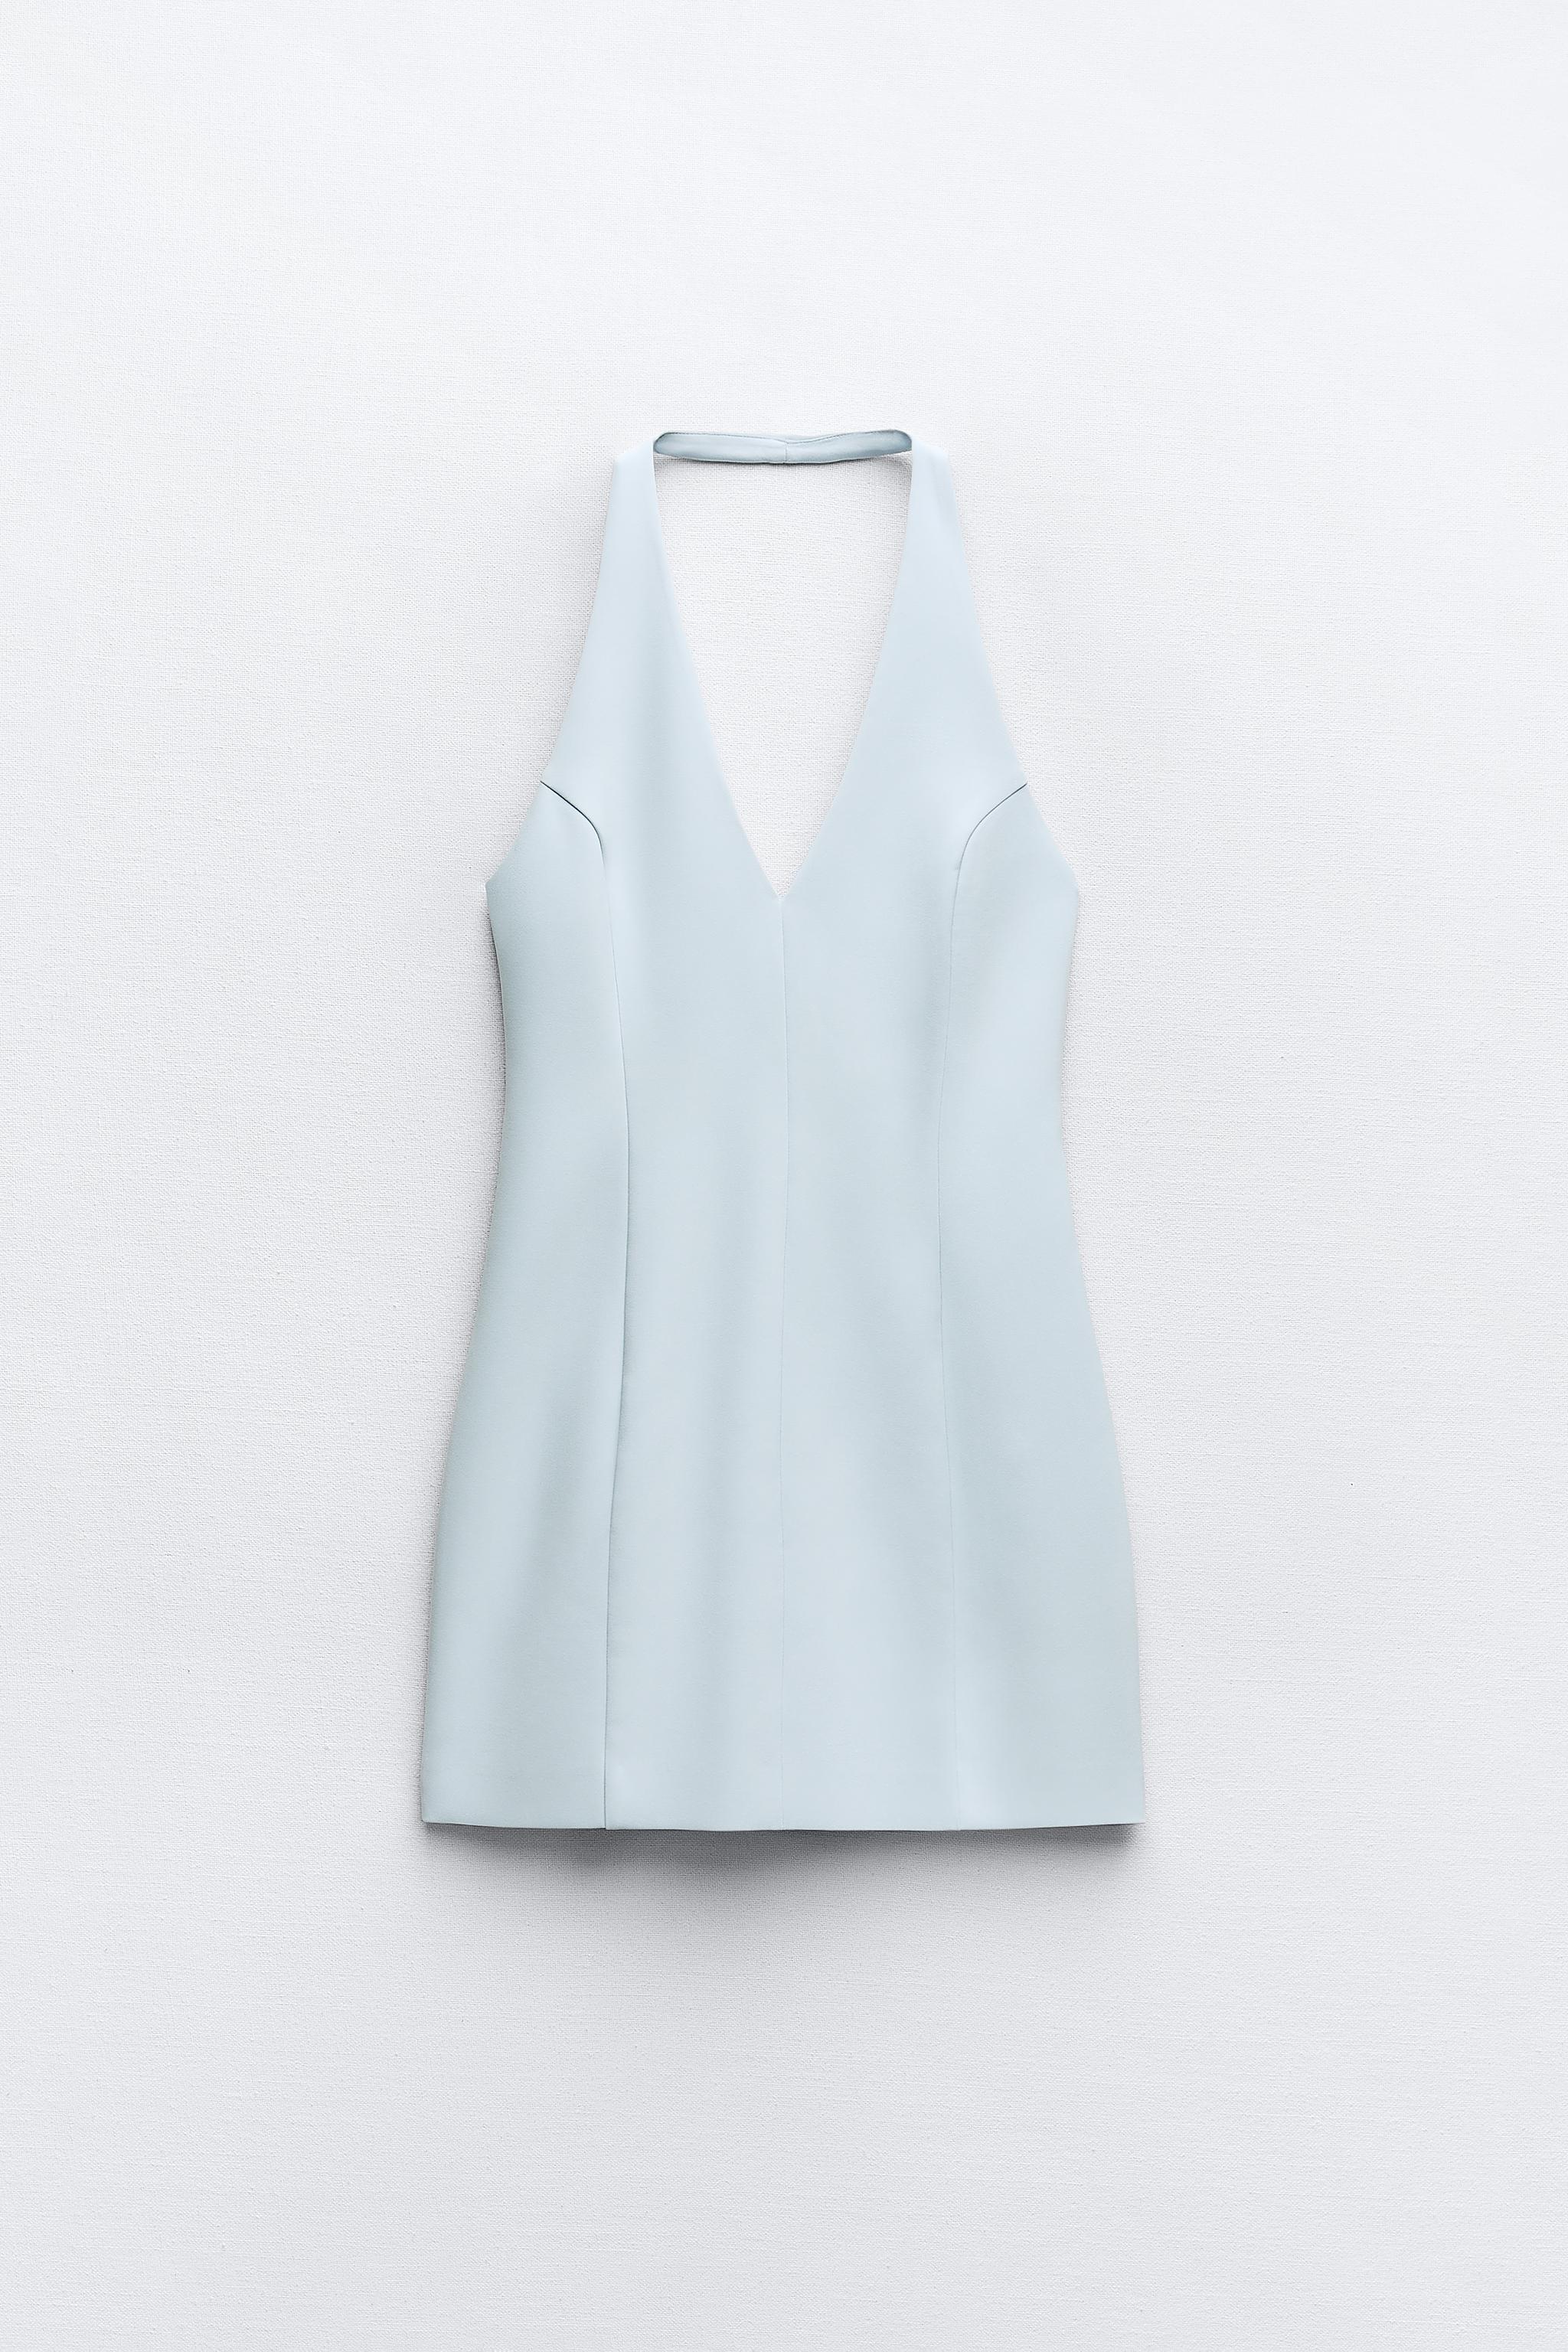 FITTED HIGH NECK DRESS - Pastel blue | ZARA United States